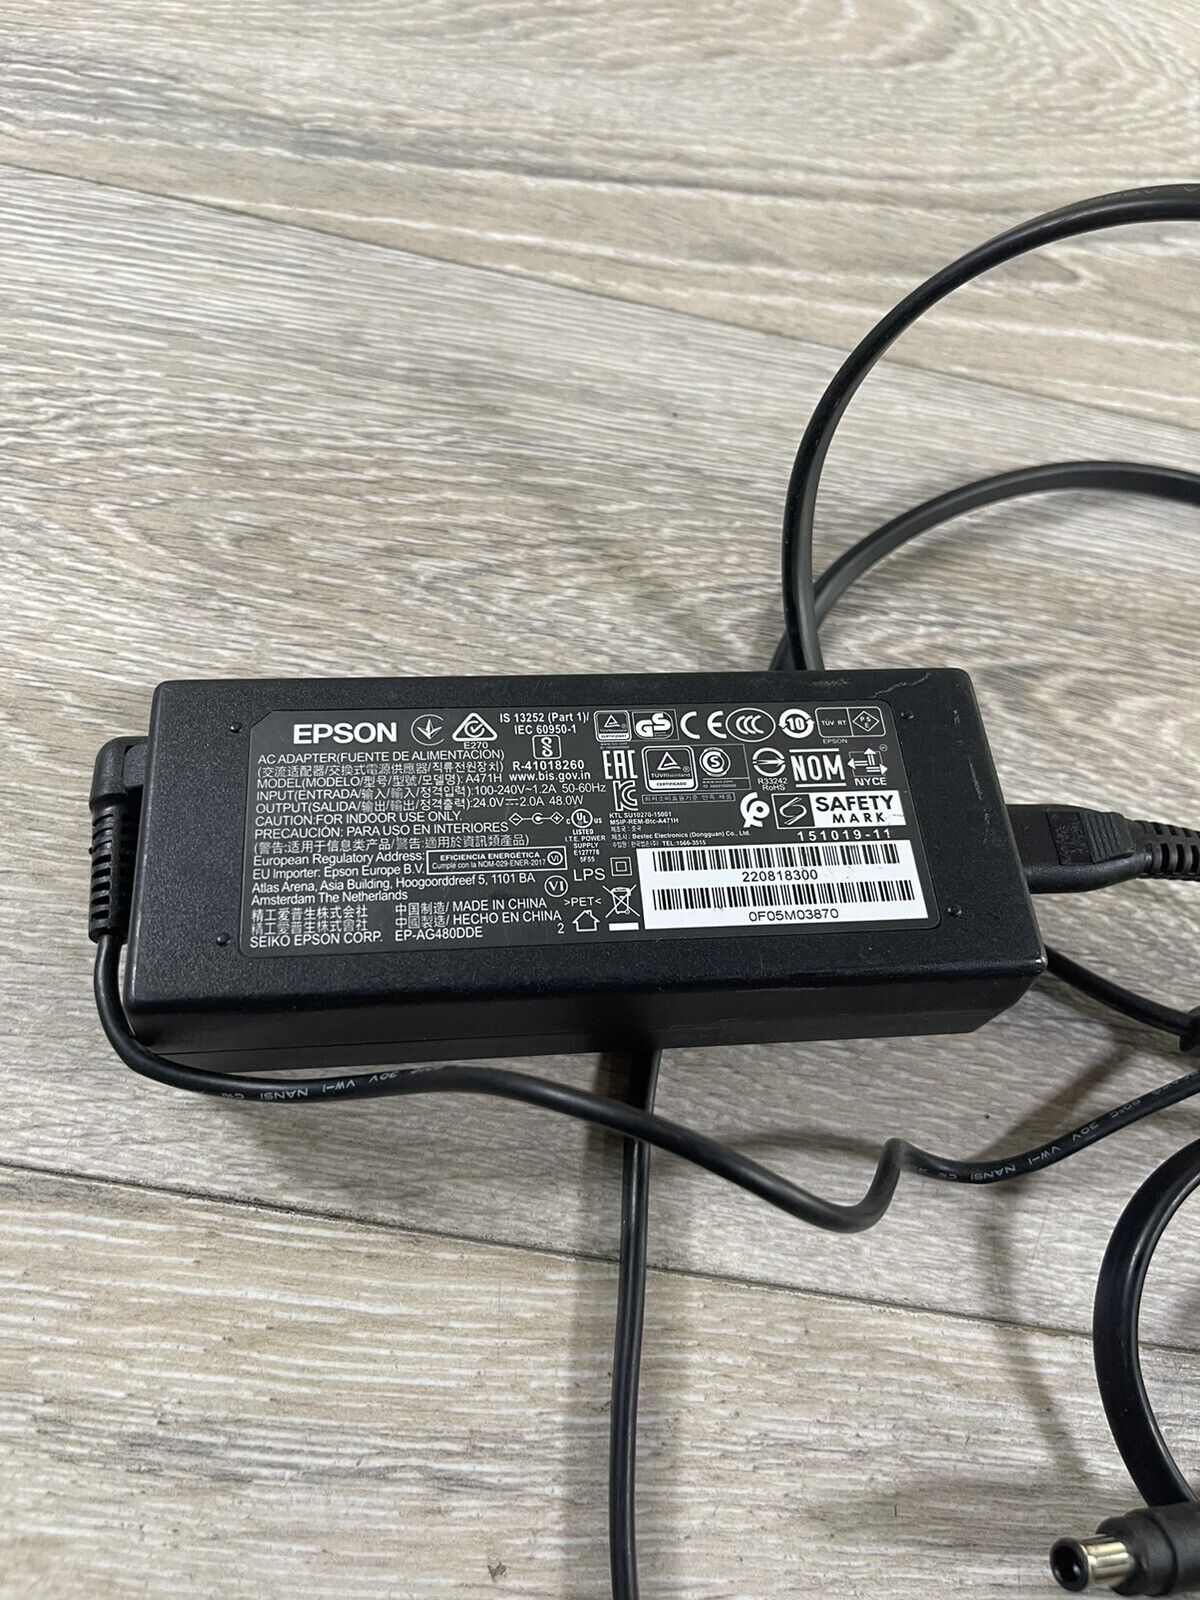 Genuine Epson 48W A471H 24V 2A Power Supply Adapter for Scanner & Printer